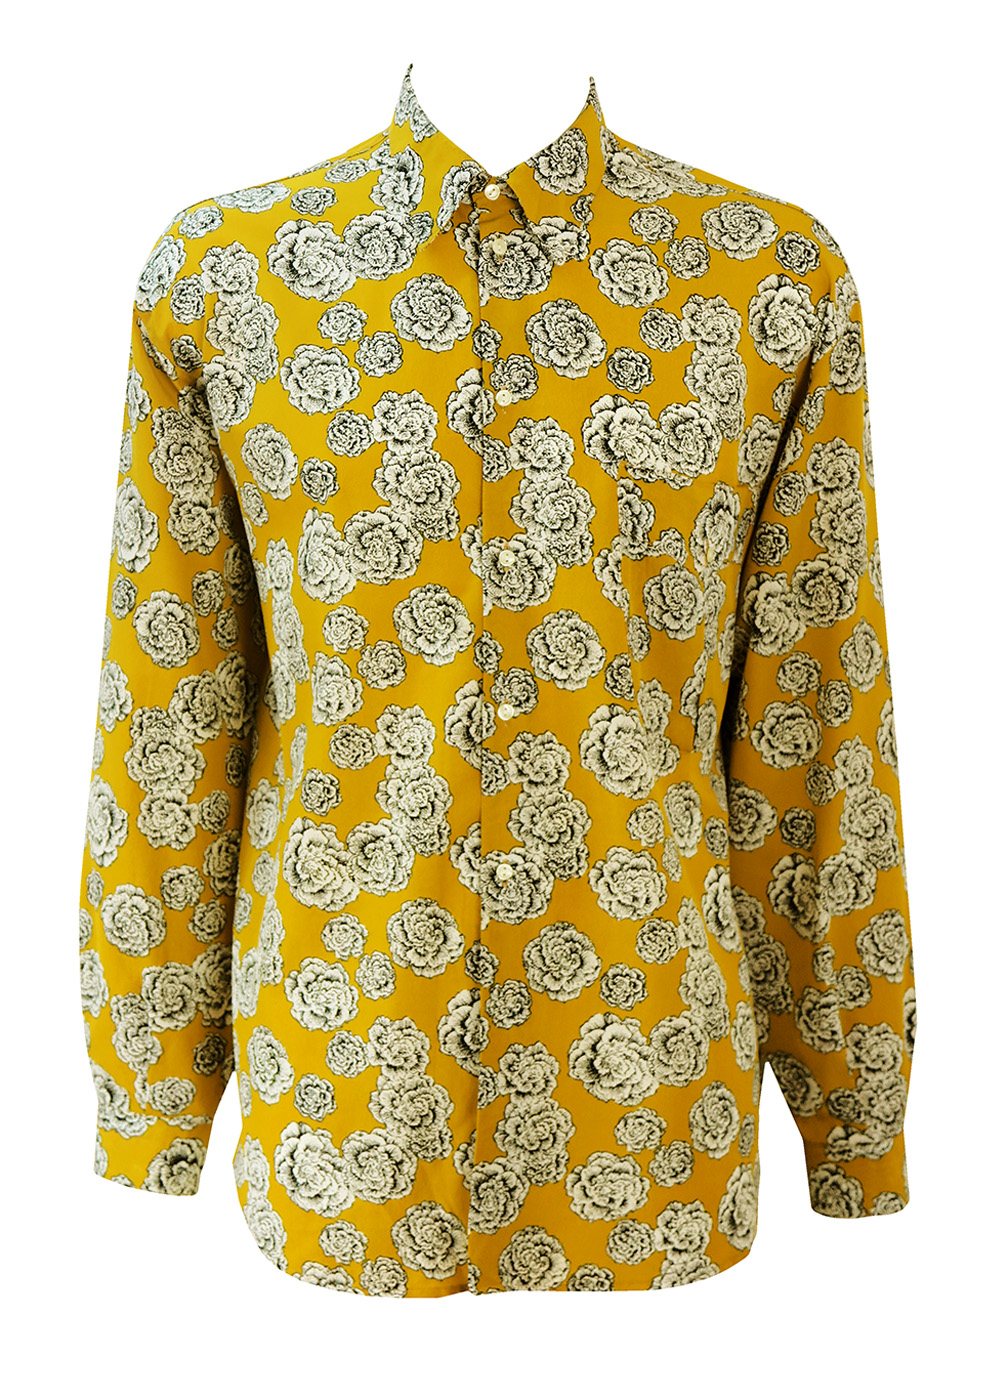 Long Length Ochre Coloured Shirt with Black & White Floral Pattern - 90 ...